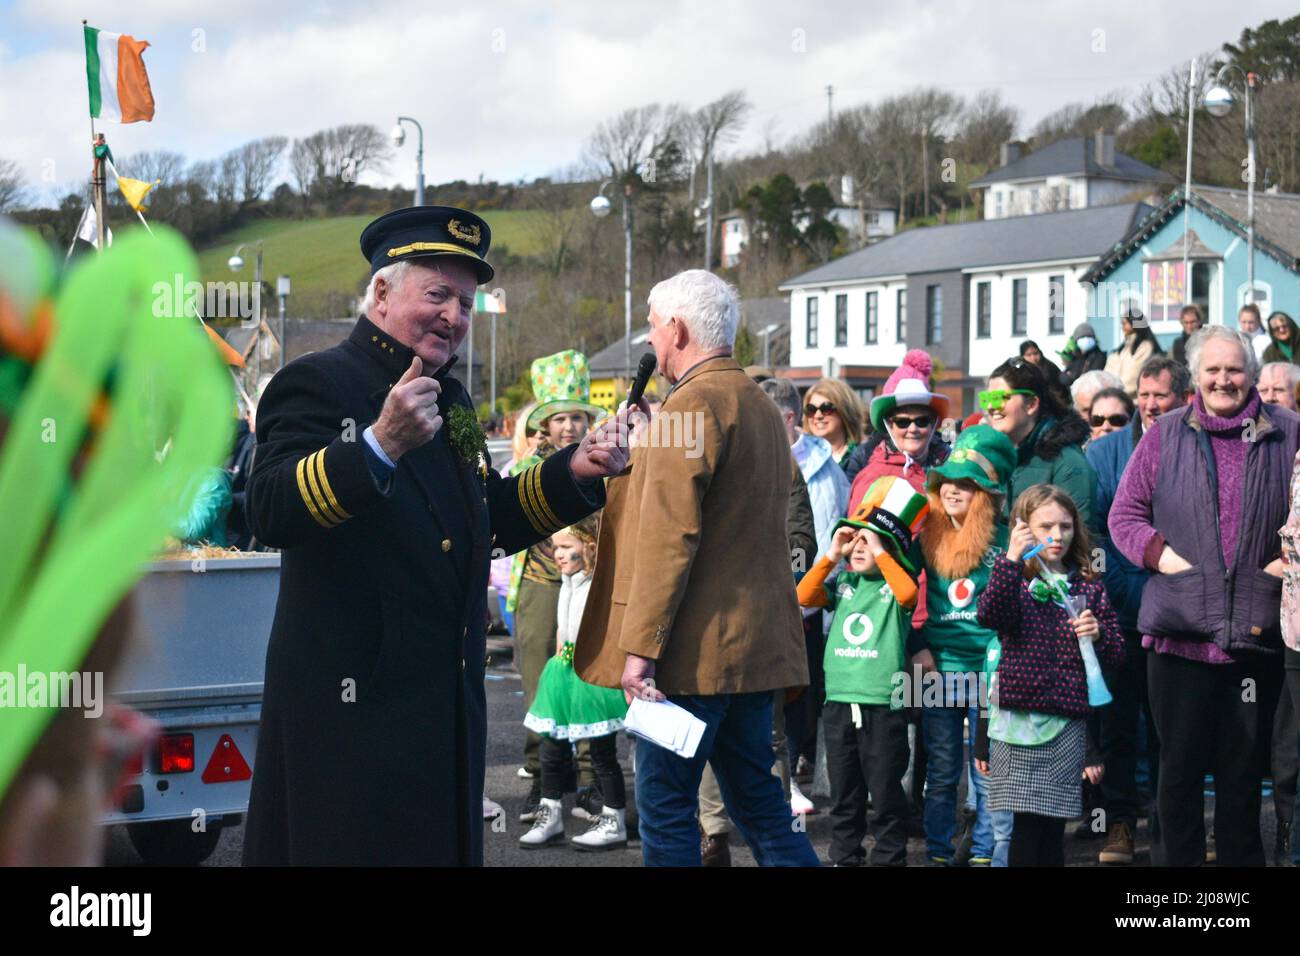 Bantry, West Cork, Ireland. 17th Mar, 2022. After a long break due to the pandemic, Saint Patrick's Day celebrations are back in full swing. A large crowd of people gathered today in the square to watch the parade and enjoy the sunny day. Credit: Karlis Dzjamko/Alamy Live News Stock Photo